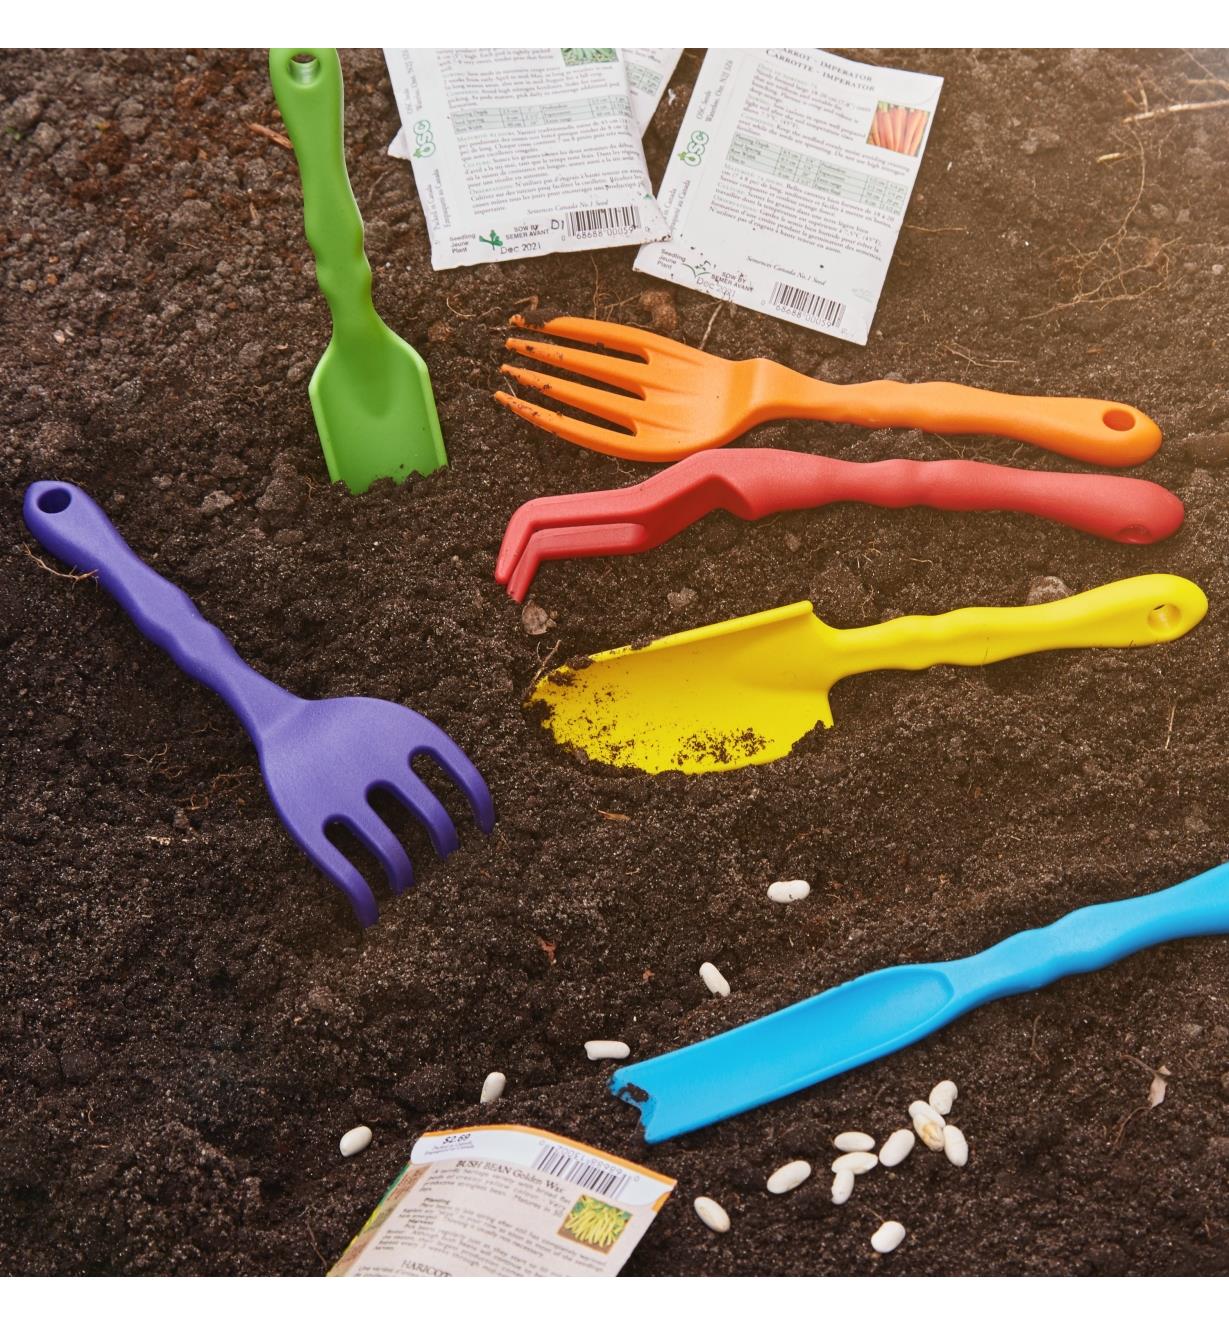 A set of six small garden tools shown in a garden bed with some seeds ready for planting